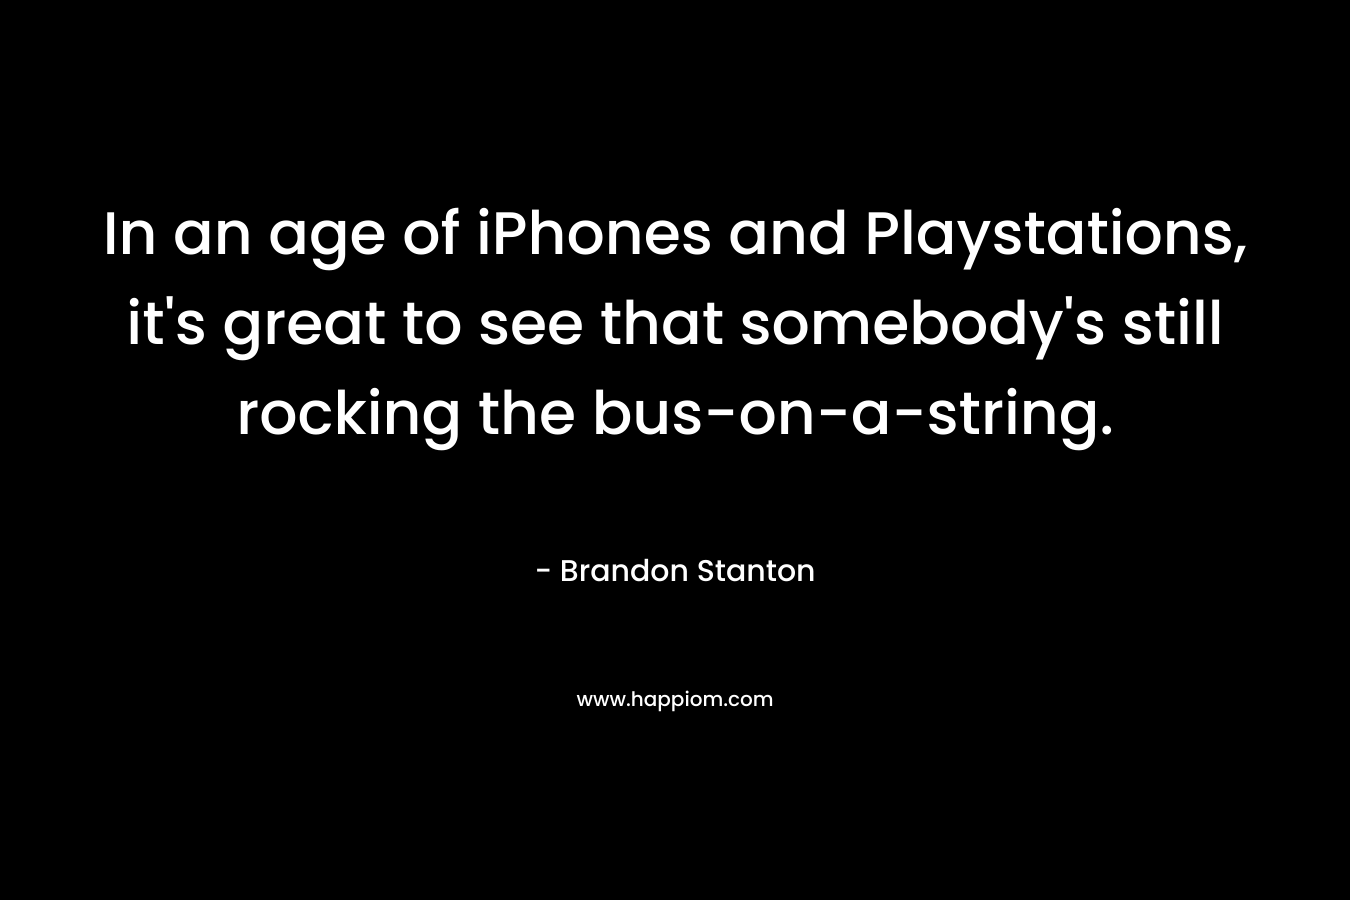 In an age of iPhones and Playstations, it’s great to see that somebody’s still rocking the bus-on-a-string. – Brandon Stanton